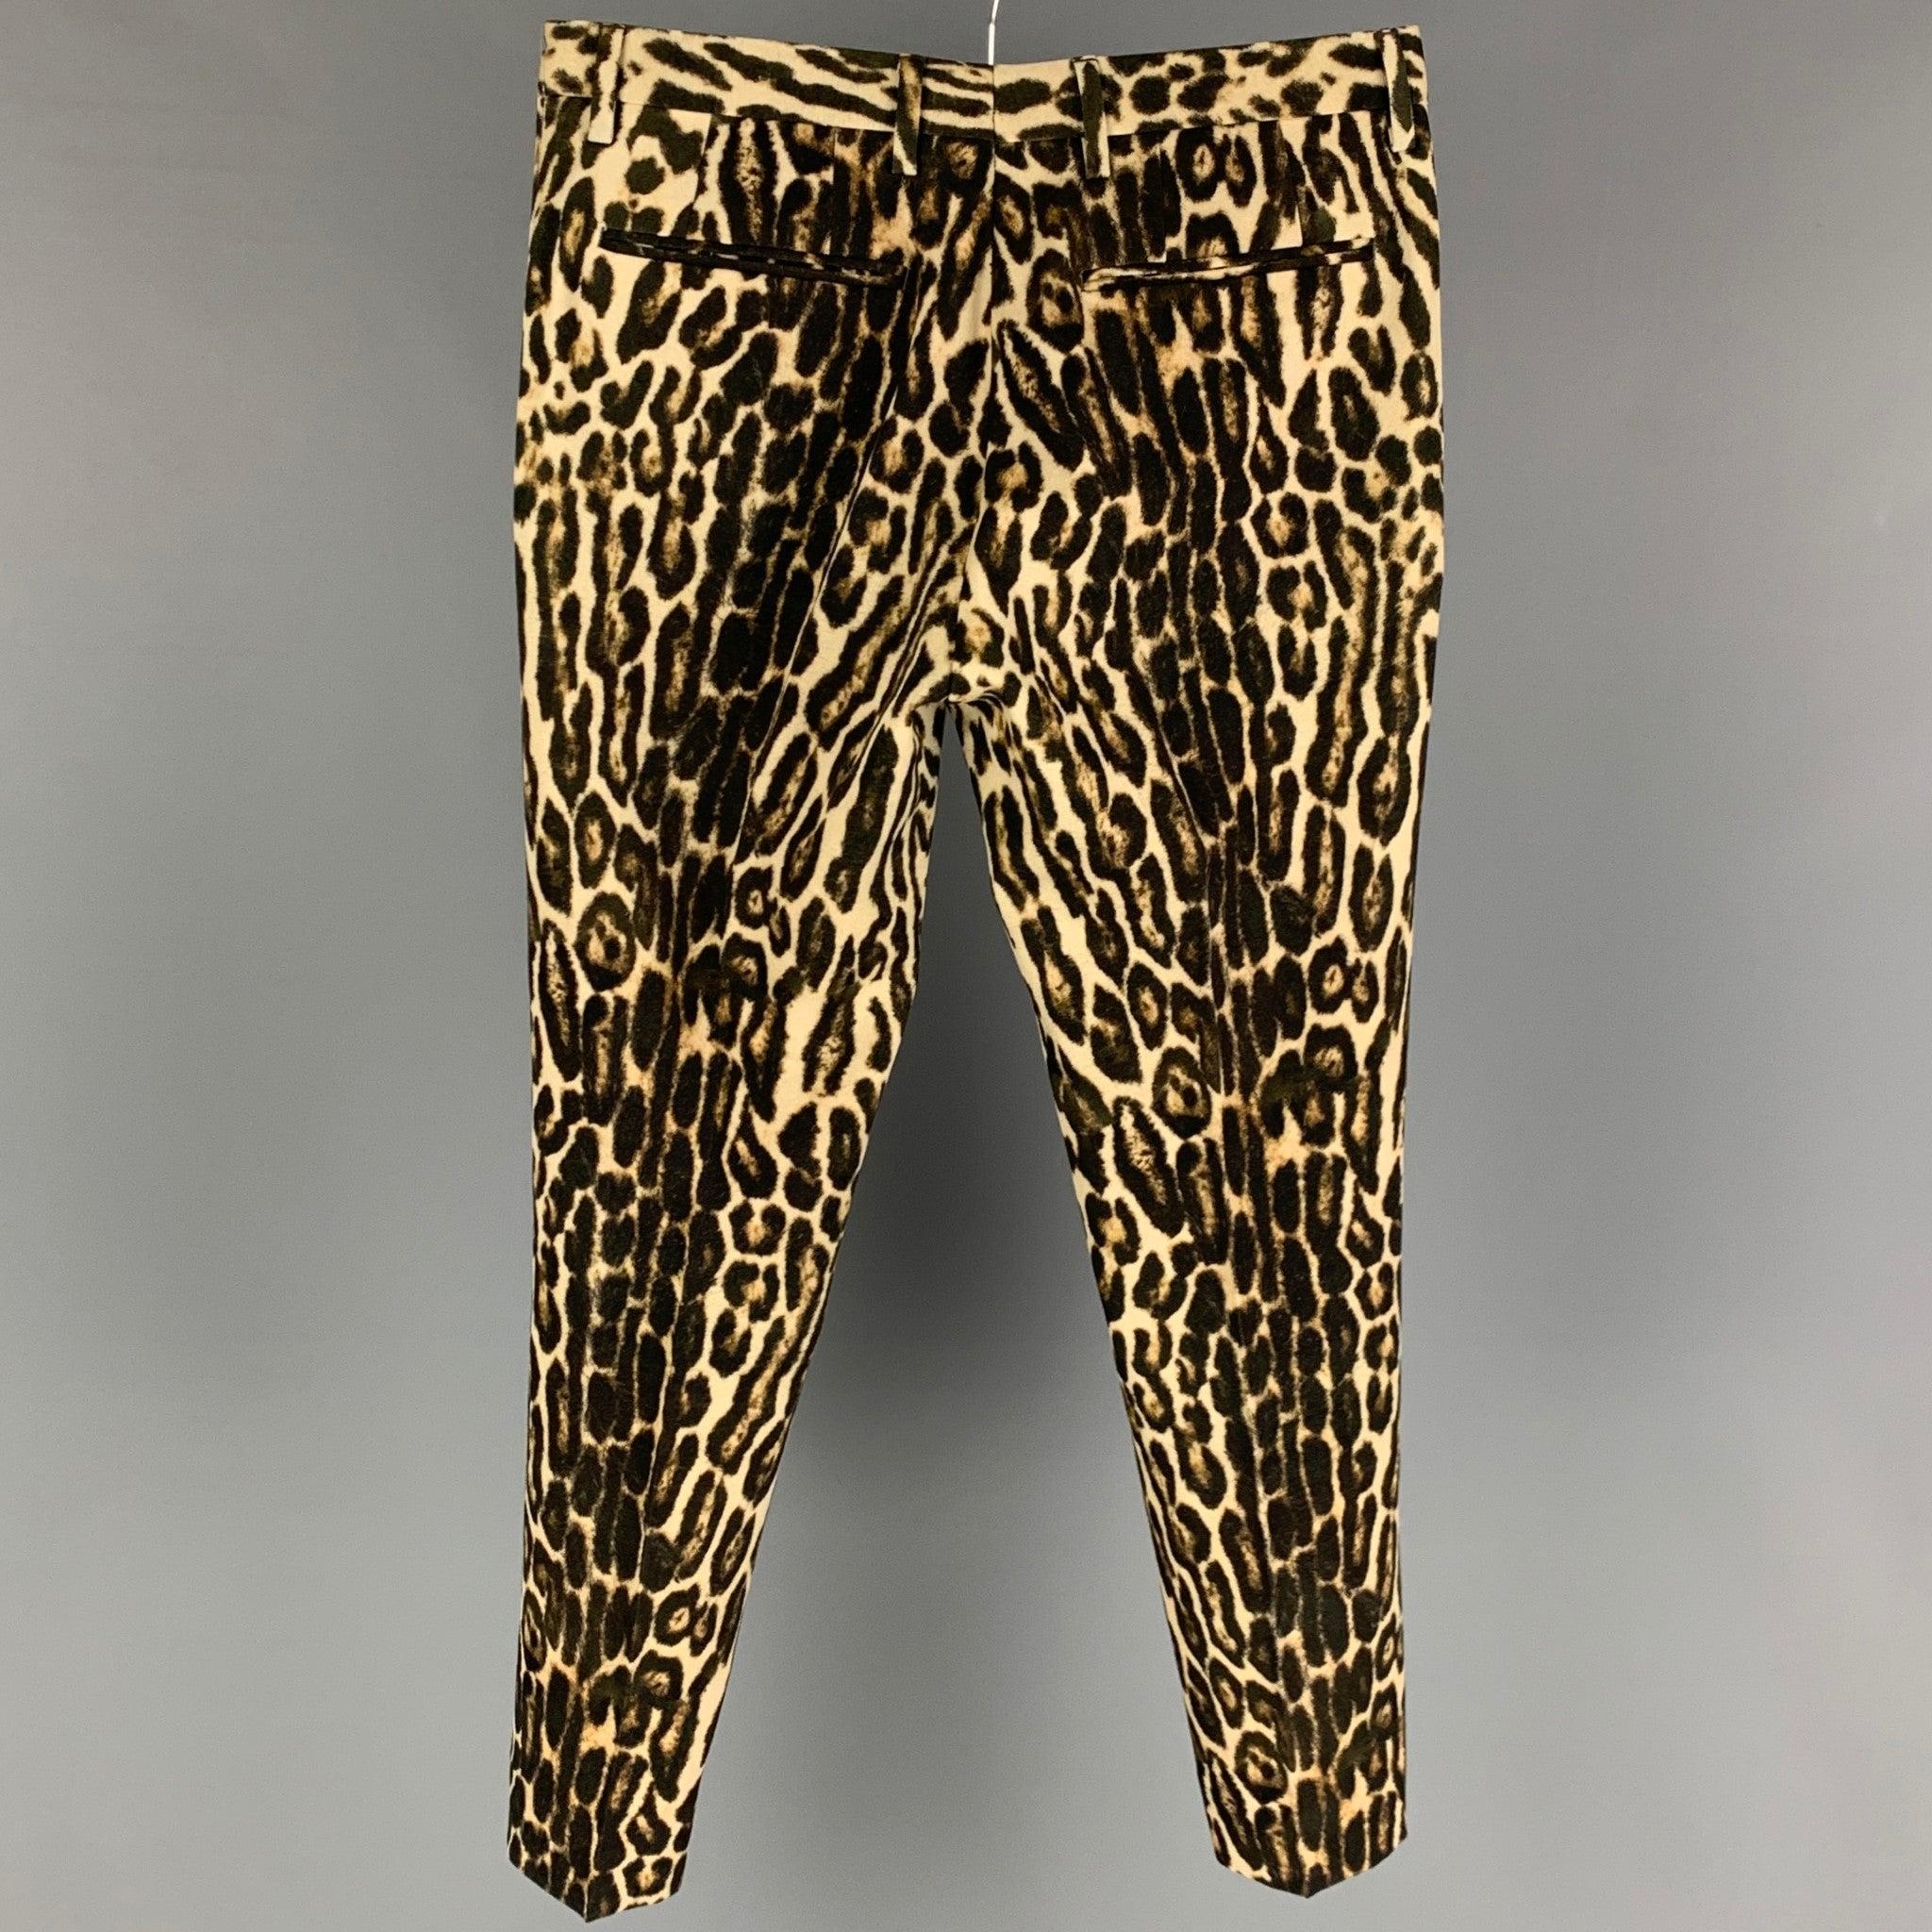 DRIES VAN NOTEN Spring-Summer 2020 dress pants comes in a black & tan animal print wool featuring a flat front, front tab, and a zip fly closure.
Excellent
Pre-Owned Condition. 

Marked:   46 

Measurements: 
  Waist: 31 inches  Rise: 9 inches 